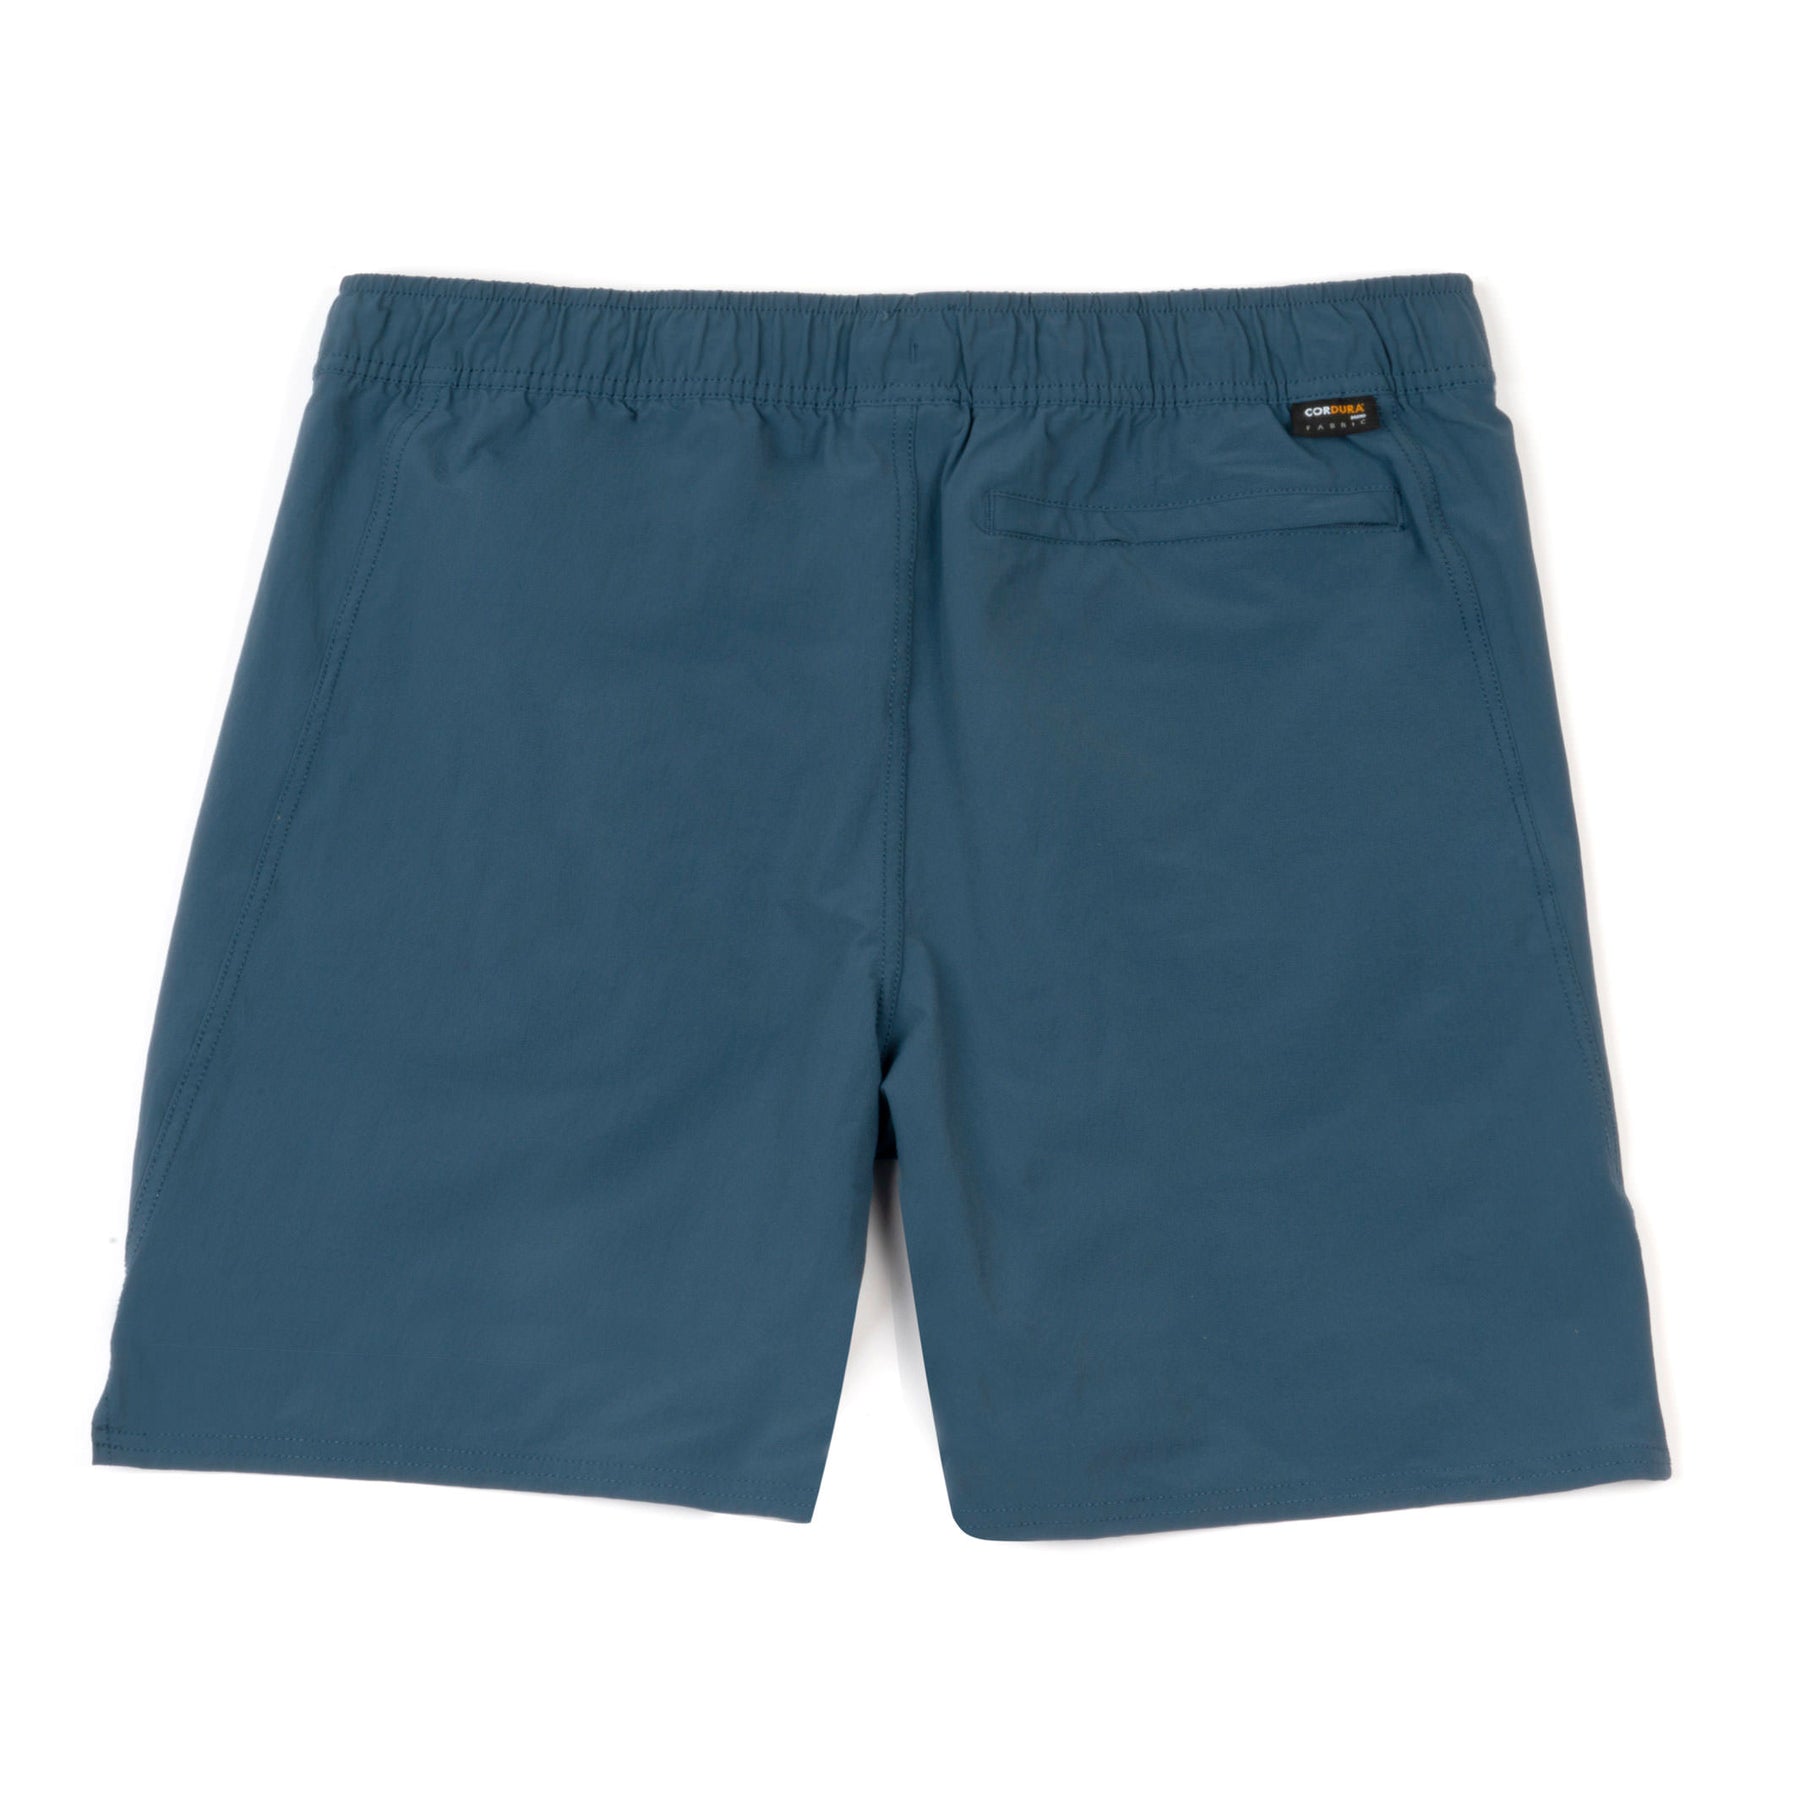 These shorts have a built-in performance liner. The shell is constructed  from a technical ripstop material with four-way stretch. Our ne